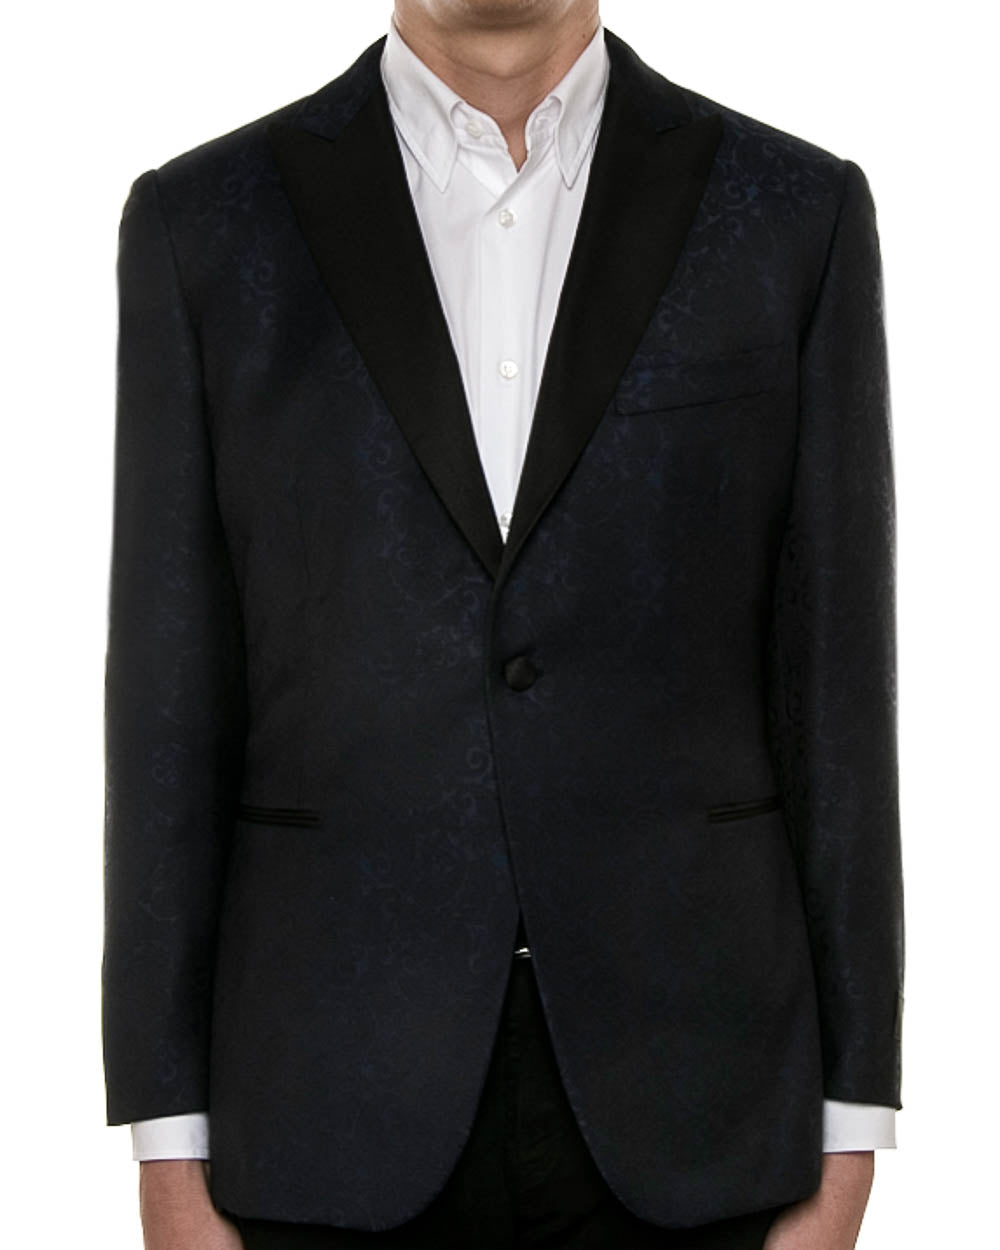 Navy and Black Paisley Dinner Jacket